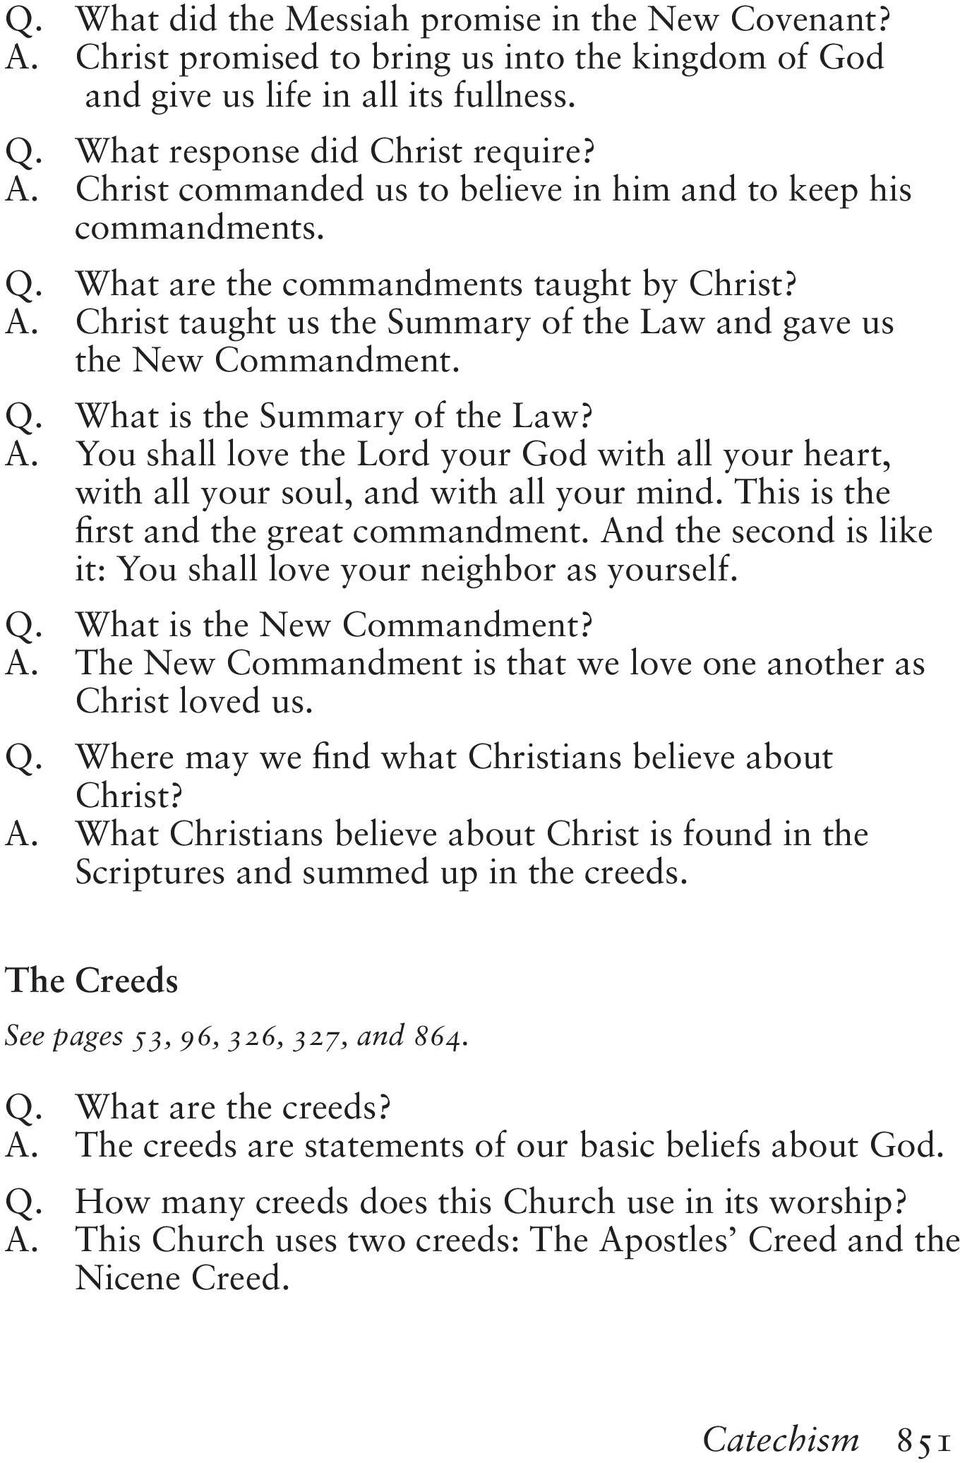 This is the first and the great commandment. And the second is like it: You shall love your neighbor as yourself. Q. What is the New Commandment? A. The New Commandment is that we love one another as Christ loved us.